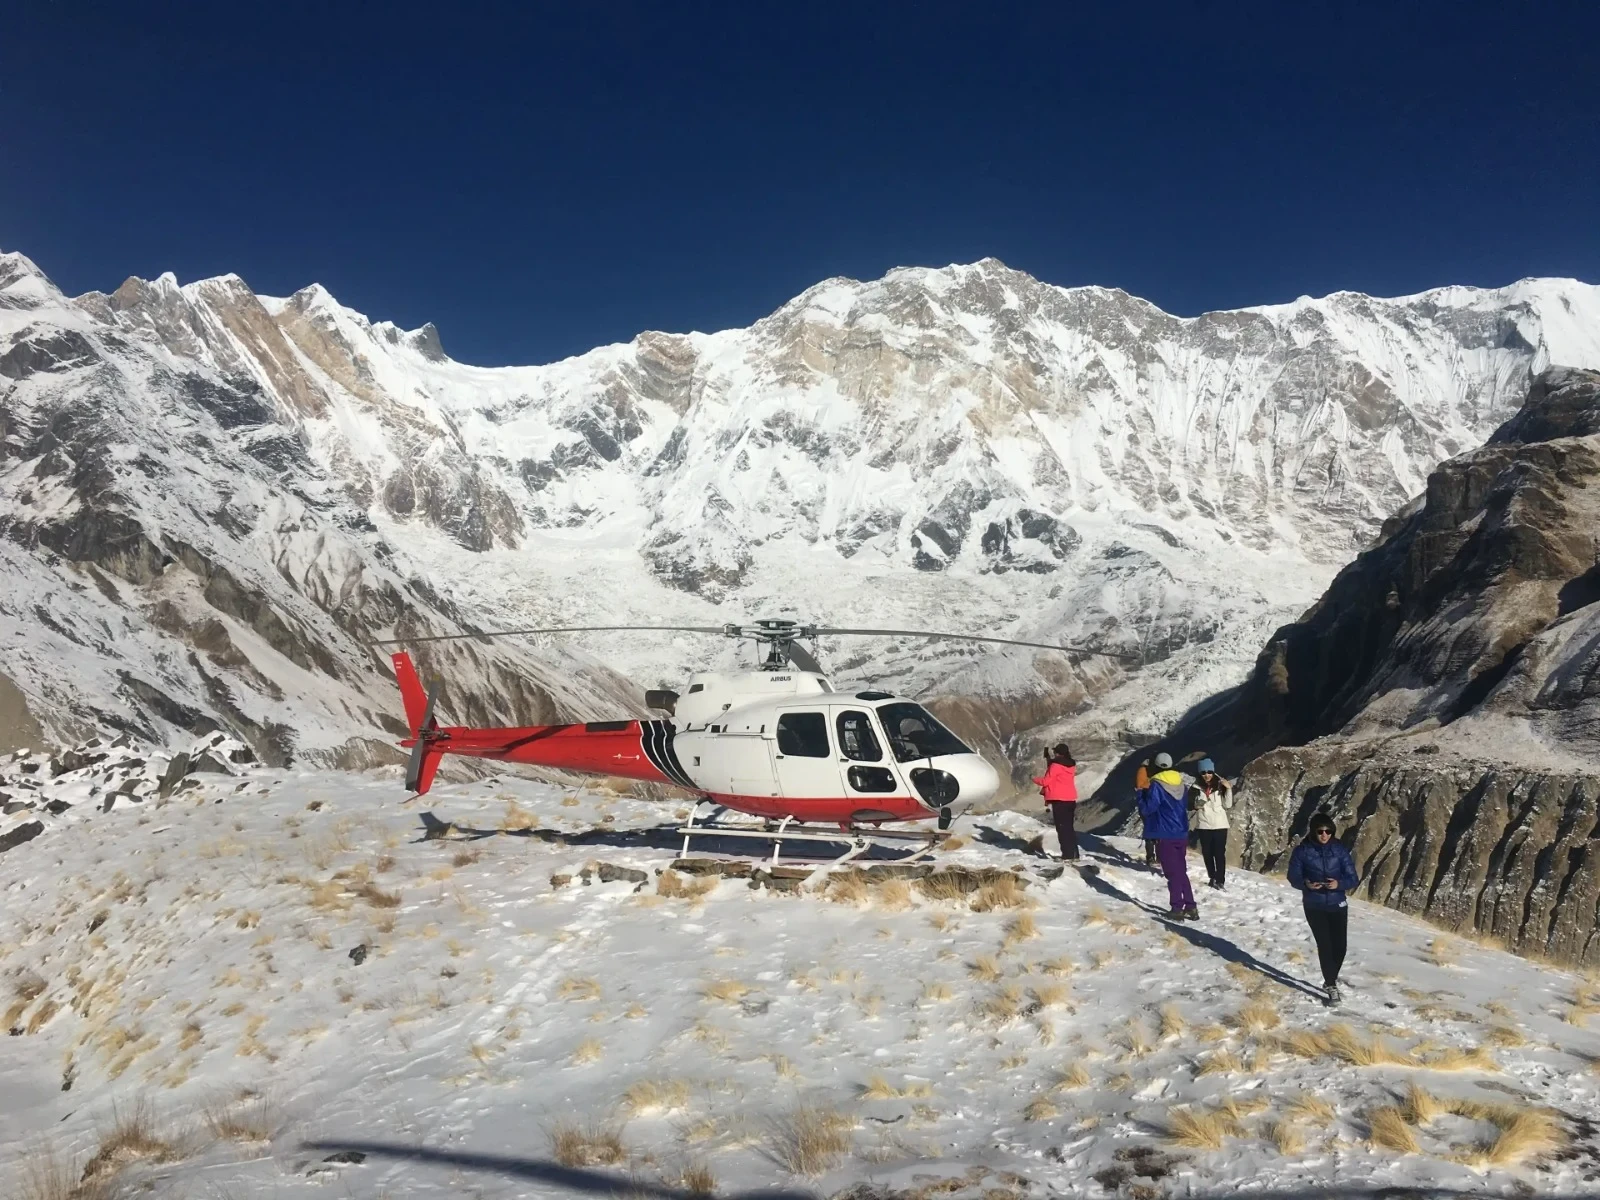 A group of people enjoying the helicopter landing tour in Annapurna Base Camp organised by North Nepal Trek